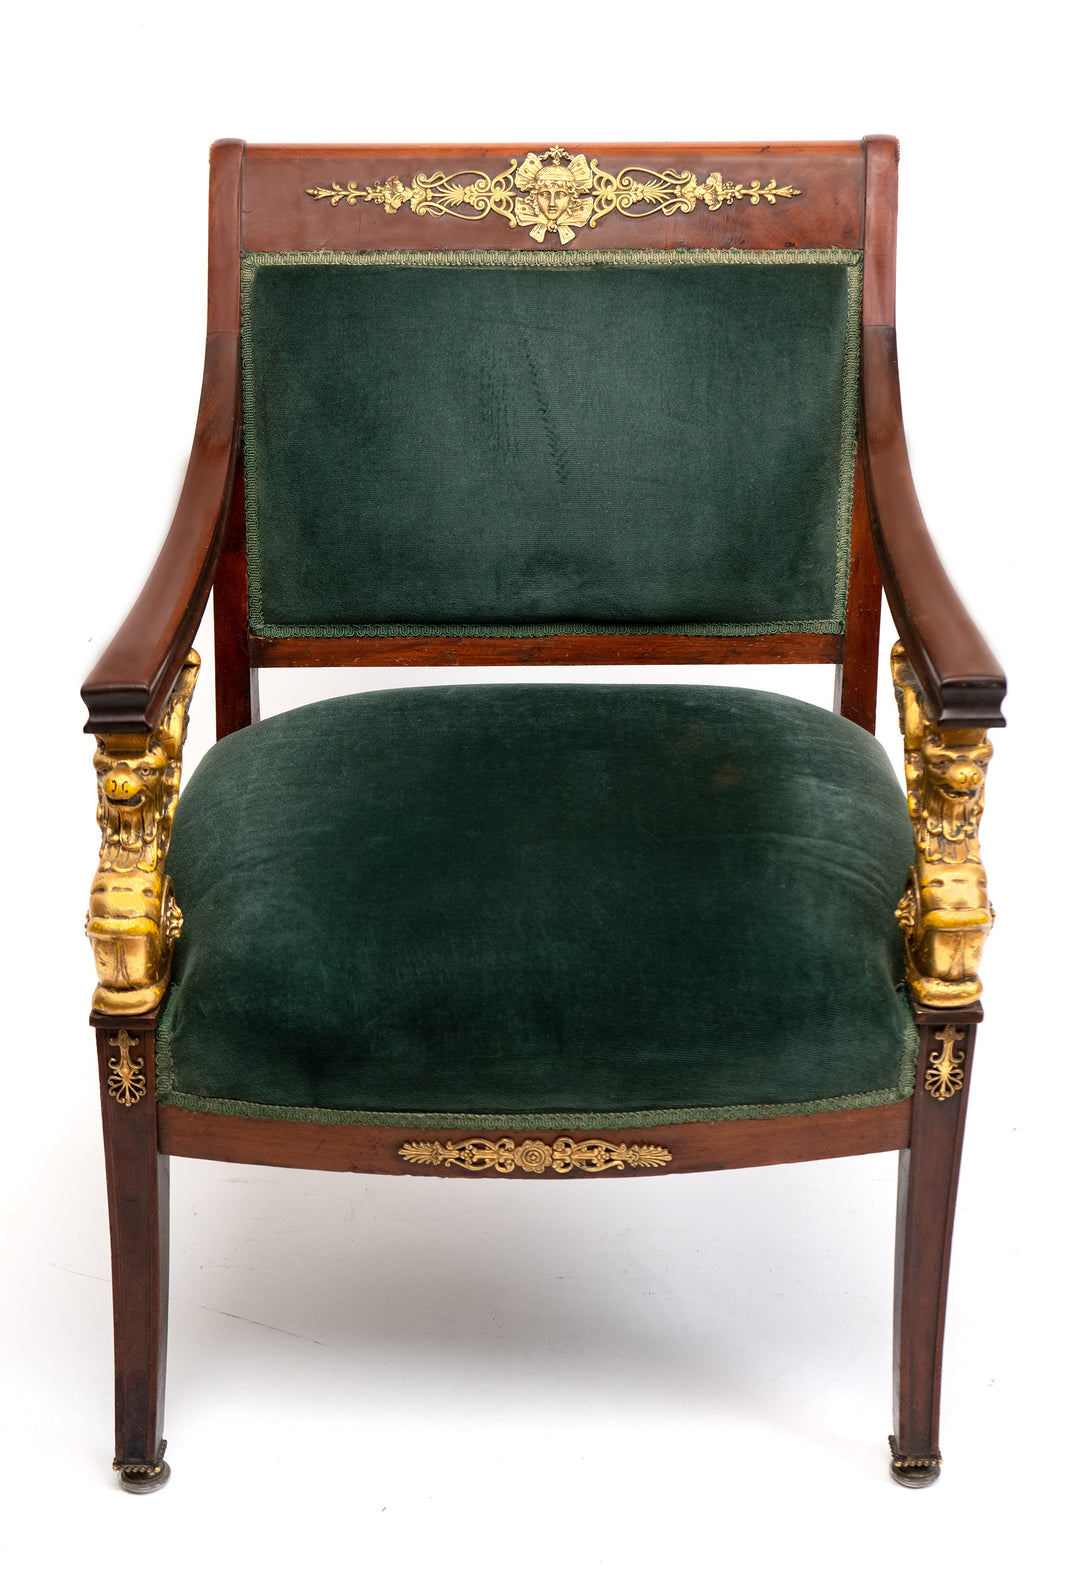 Green French Empire Fauteuil Chair